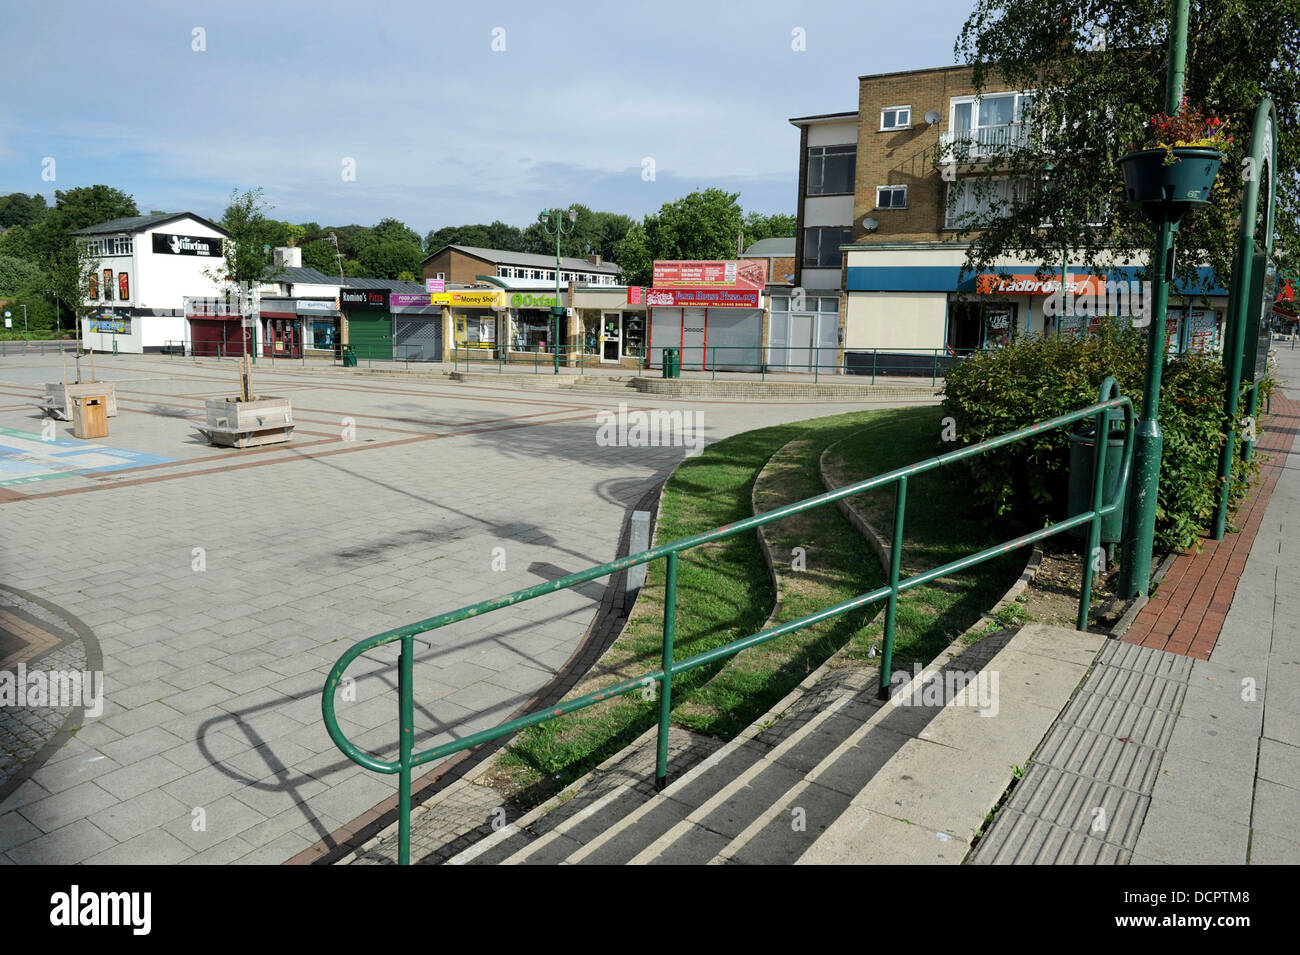 Hemel Hempstead, UK. 20th Aug, 2013. Hemel Hempstead has been named BritainÕs Ugliest Town according to a poll, run by the team behind the Crap Towns publications. The Hertfordshire town won the 'accolade' ahead of Luton, Slough and Bracknell Pictured - Market Square © KEITH MAYHEW/Alamy Live News Stock Photo